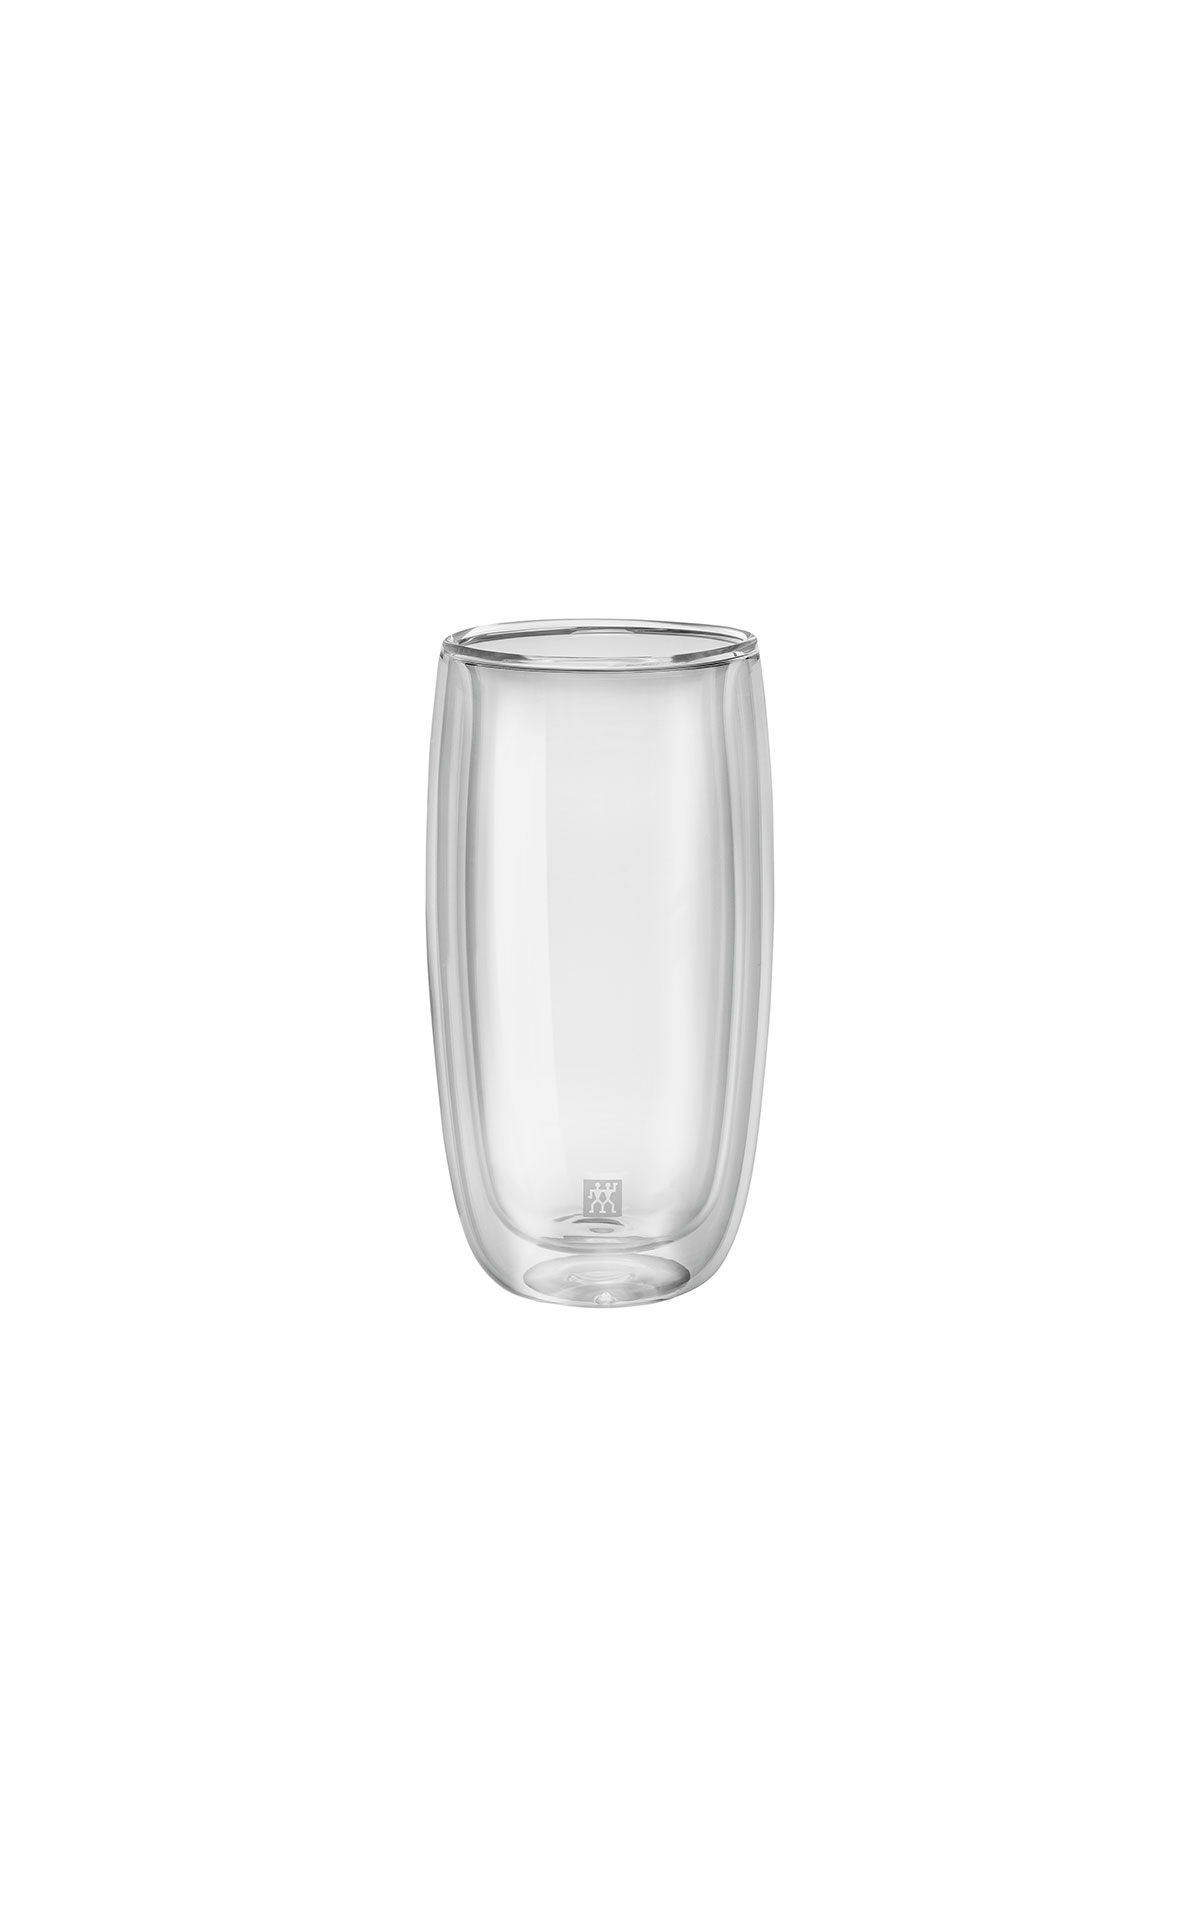 Zwilling Drinking glasses from Bicester Village